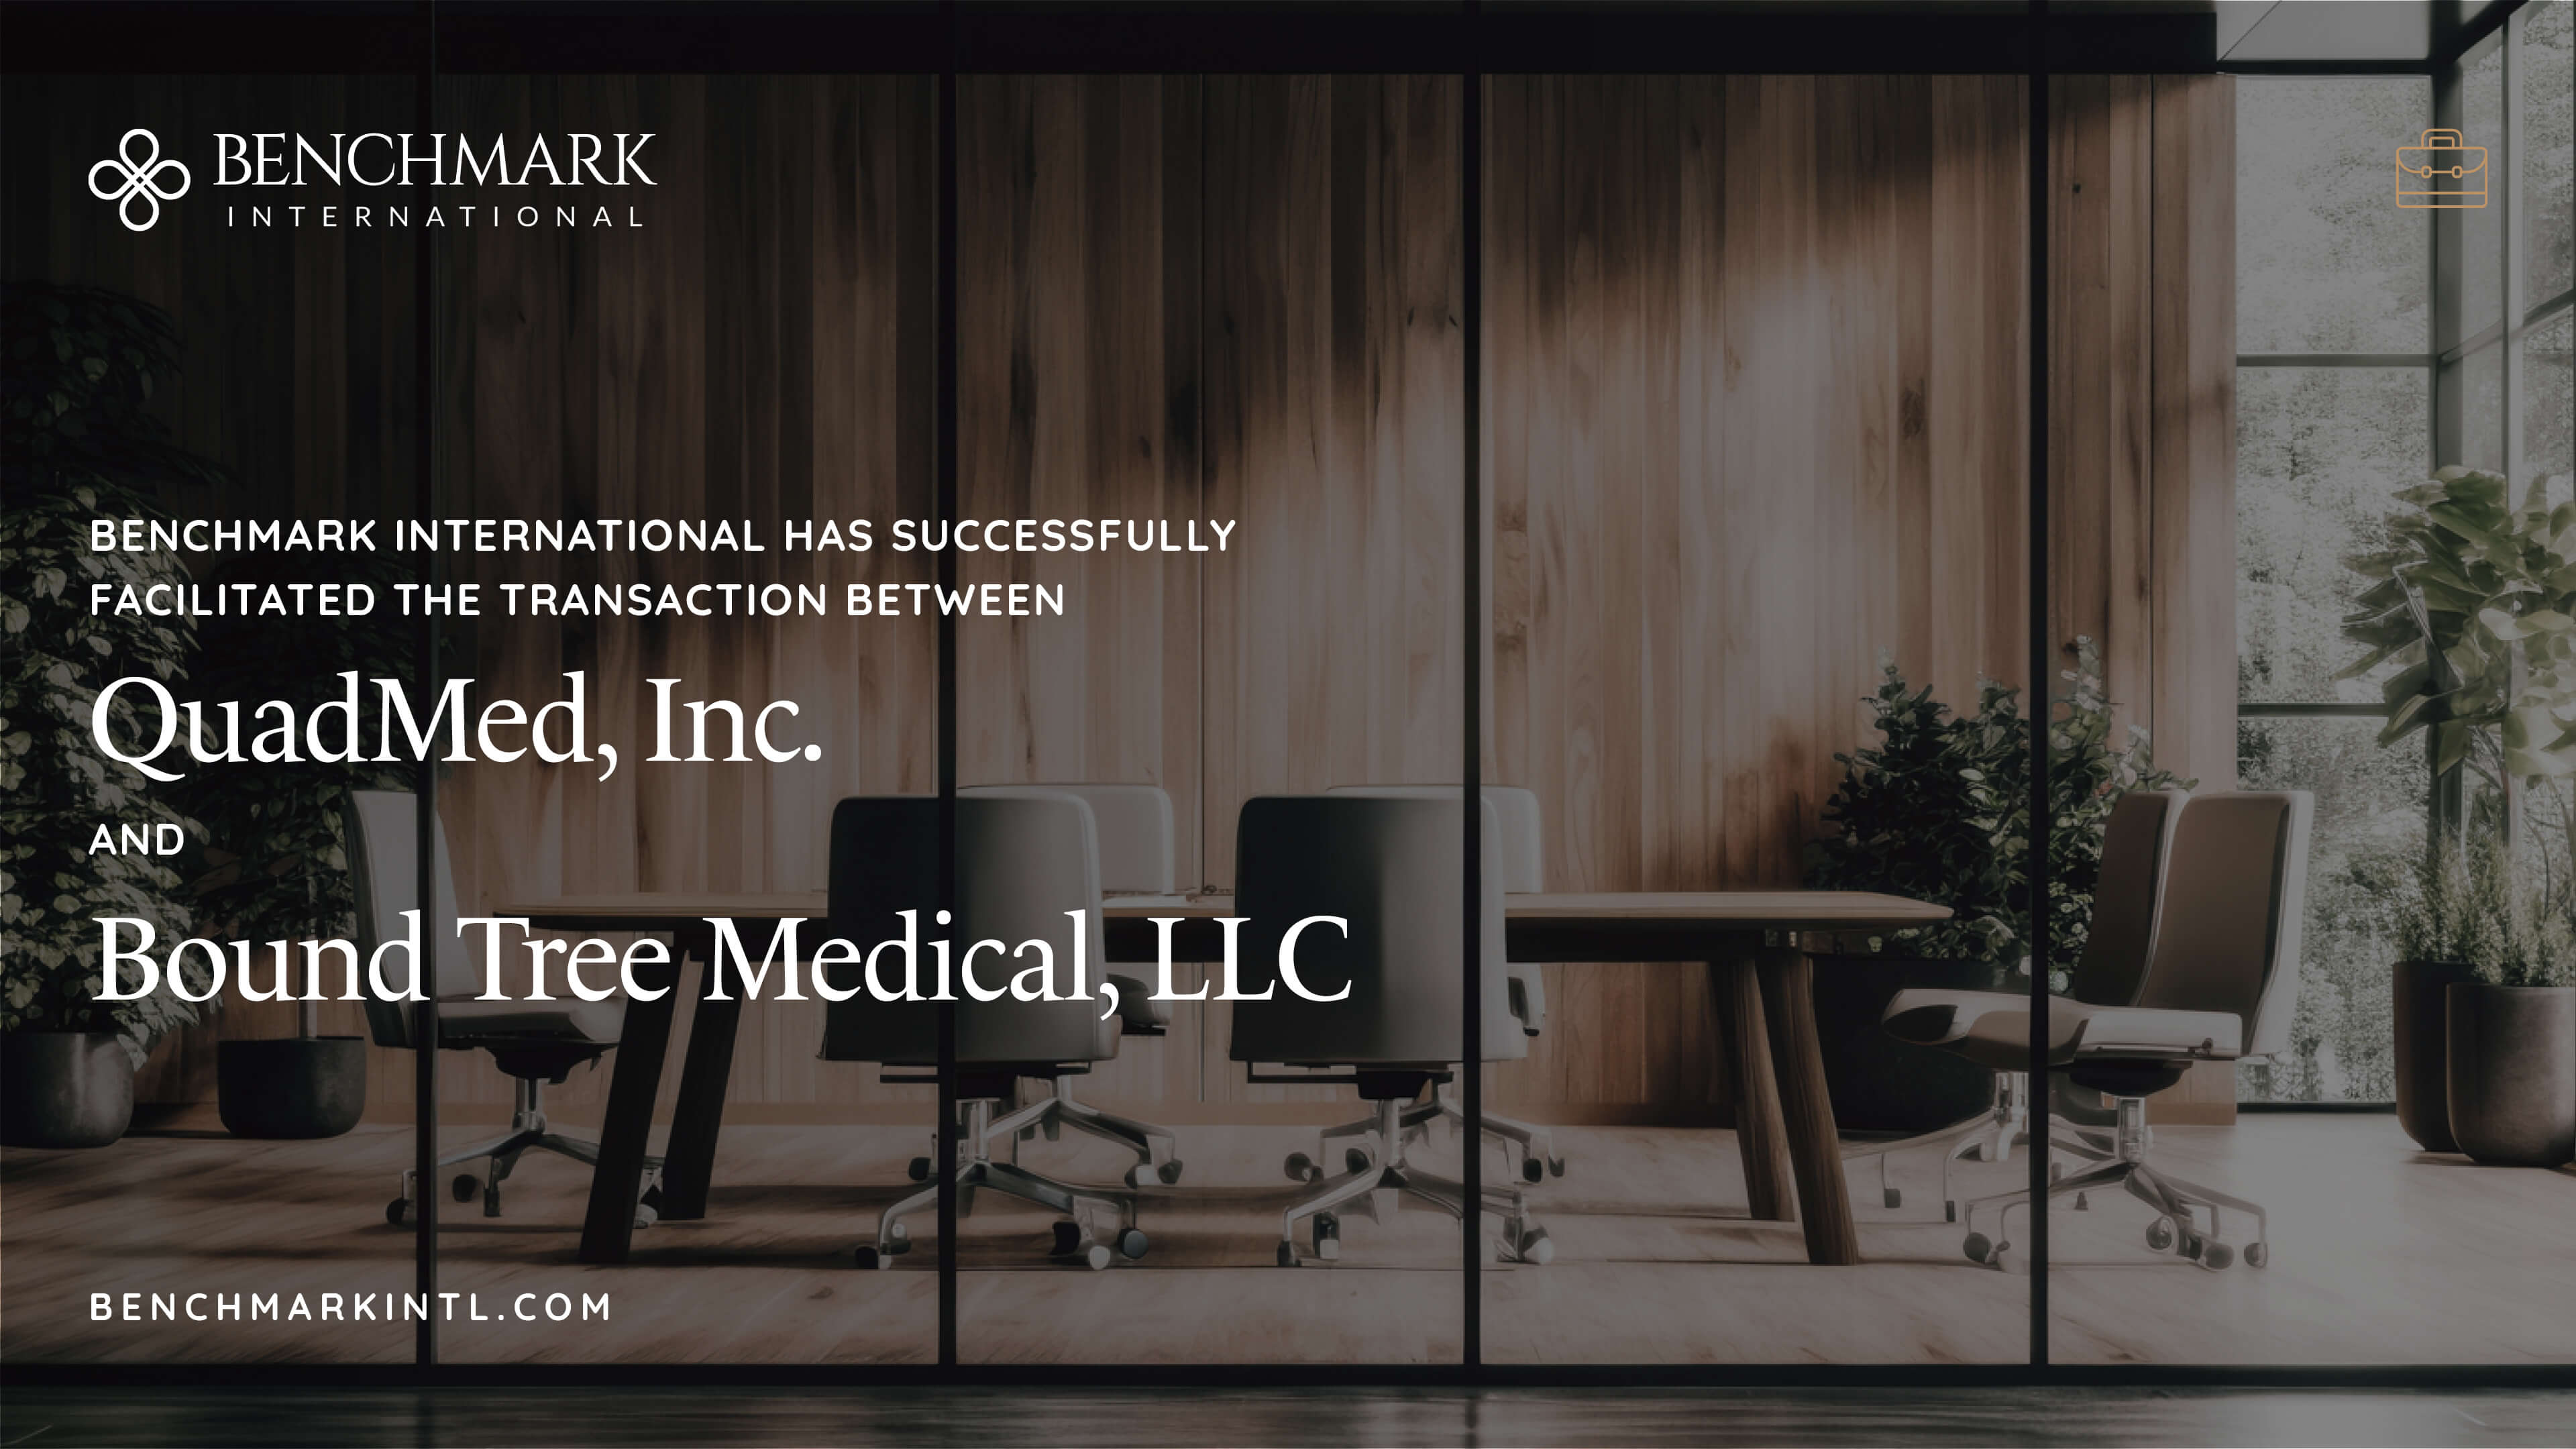 Benchmark International Has Successfully Facilitated The Transaction Between Quadmed, Inc. And Bound Tree Medical, LLC